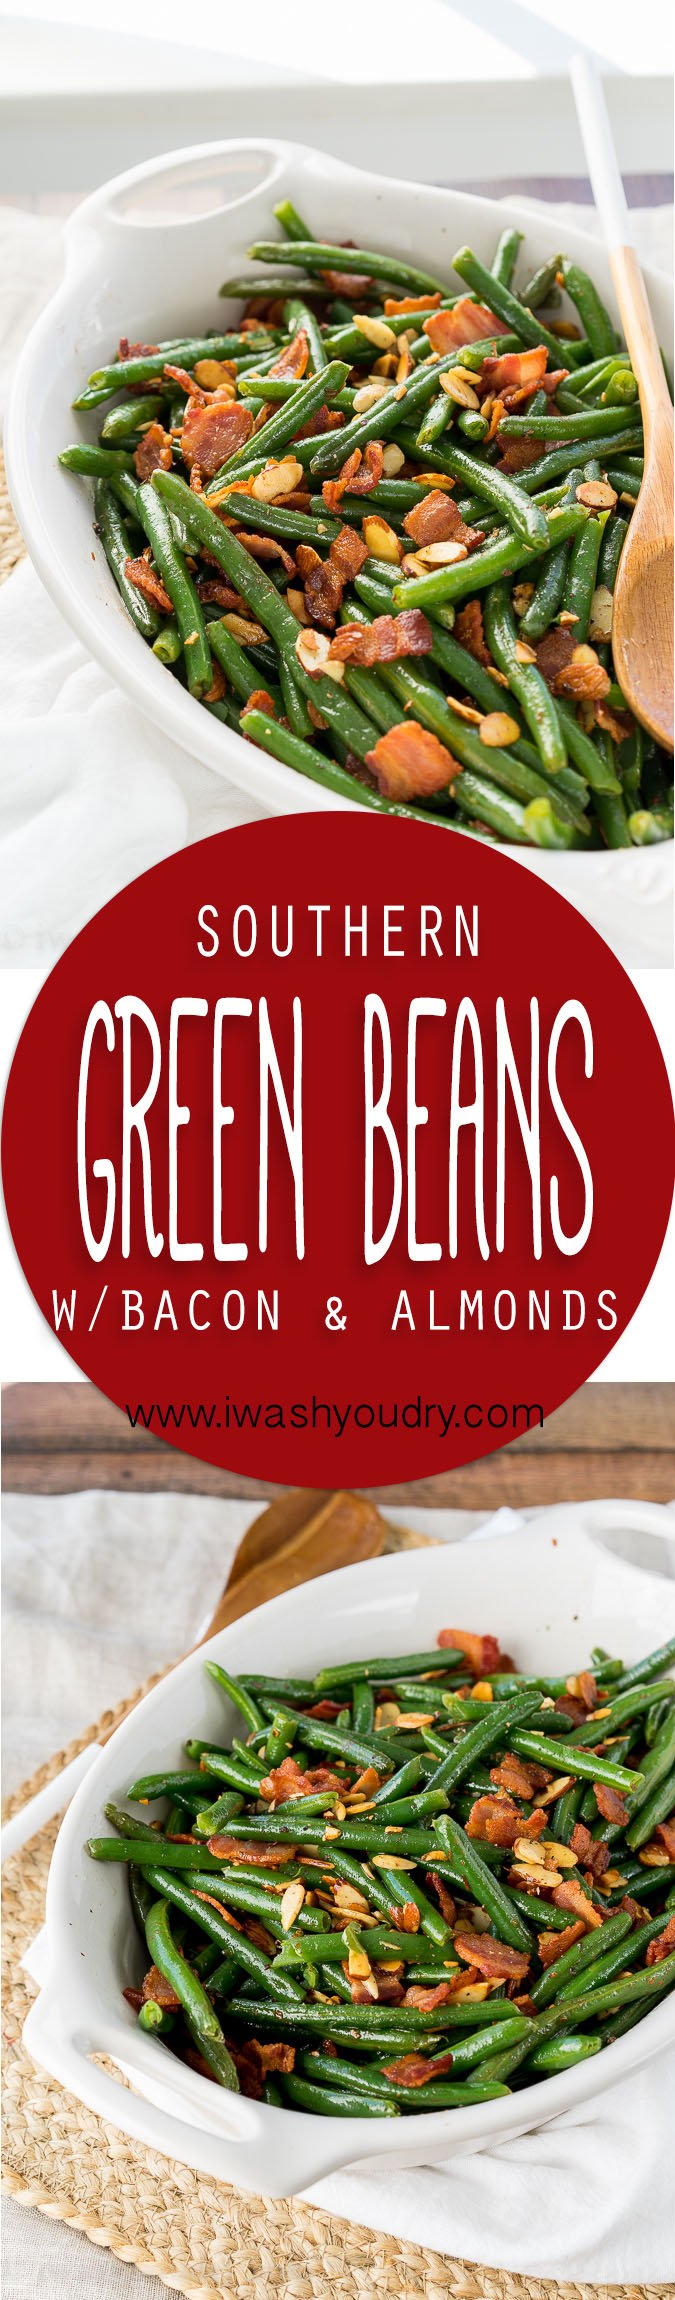 These Southern Green Beans with Bacon and Almonds are a side dish recipe that's a staple at any holiday dinner! Full of flavor and super easy to make, my whole family loves these!